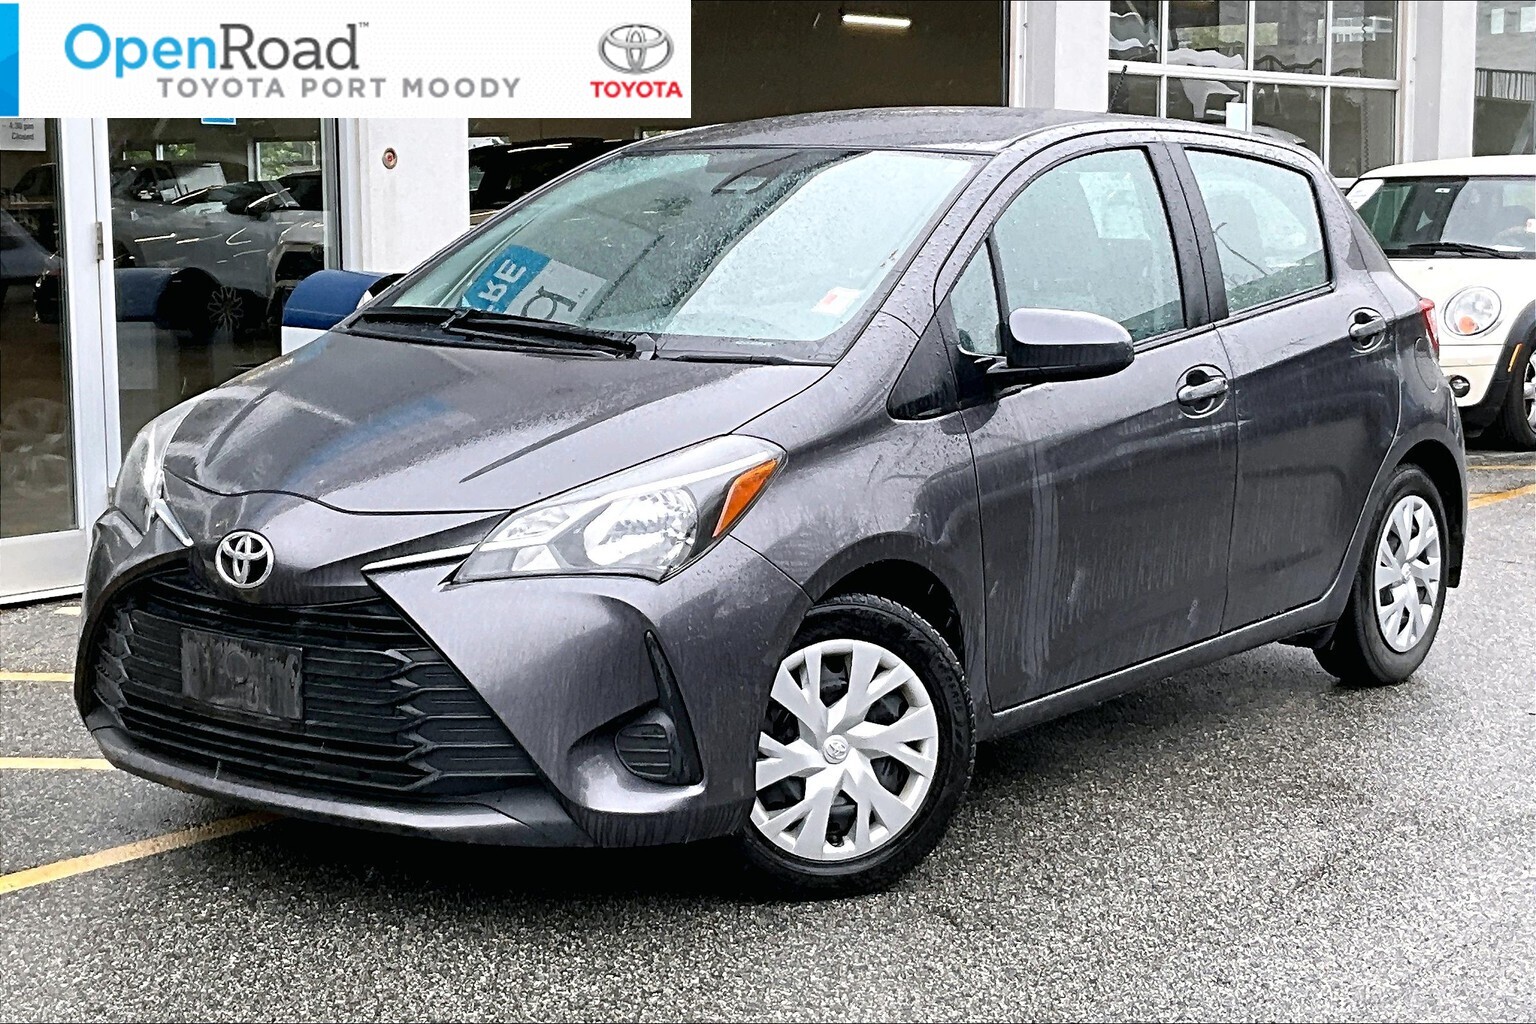 2019 Toyota Yaris 5 Dr LE Htbk 4A |OpenRoad True Price |Local |One O